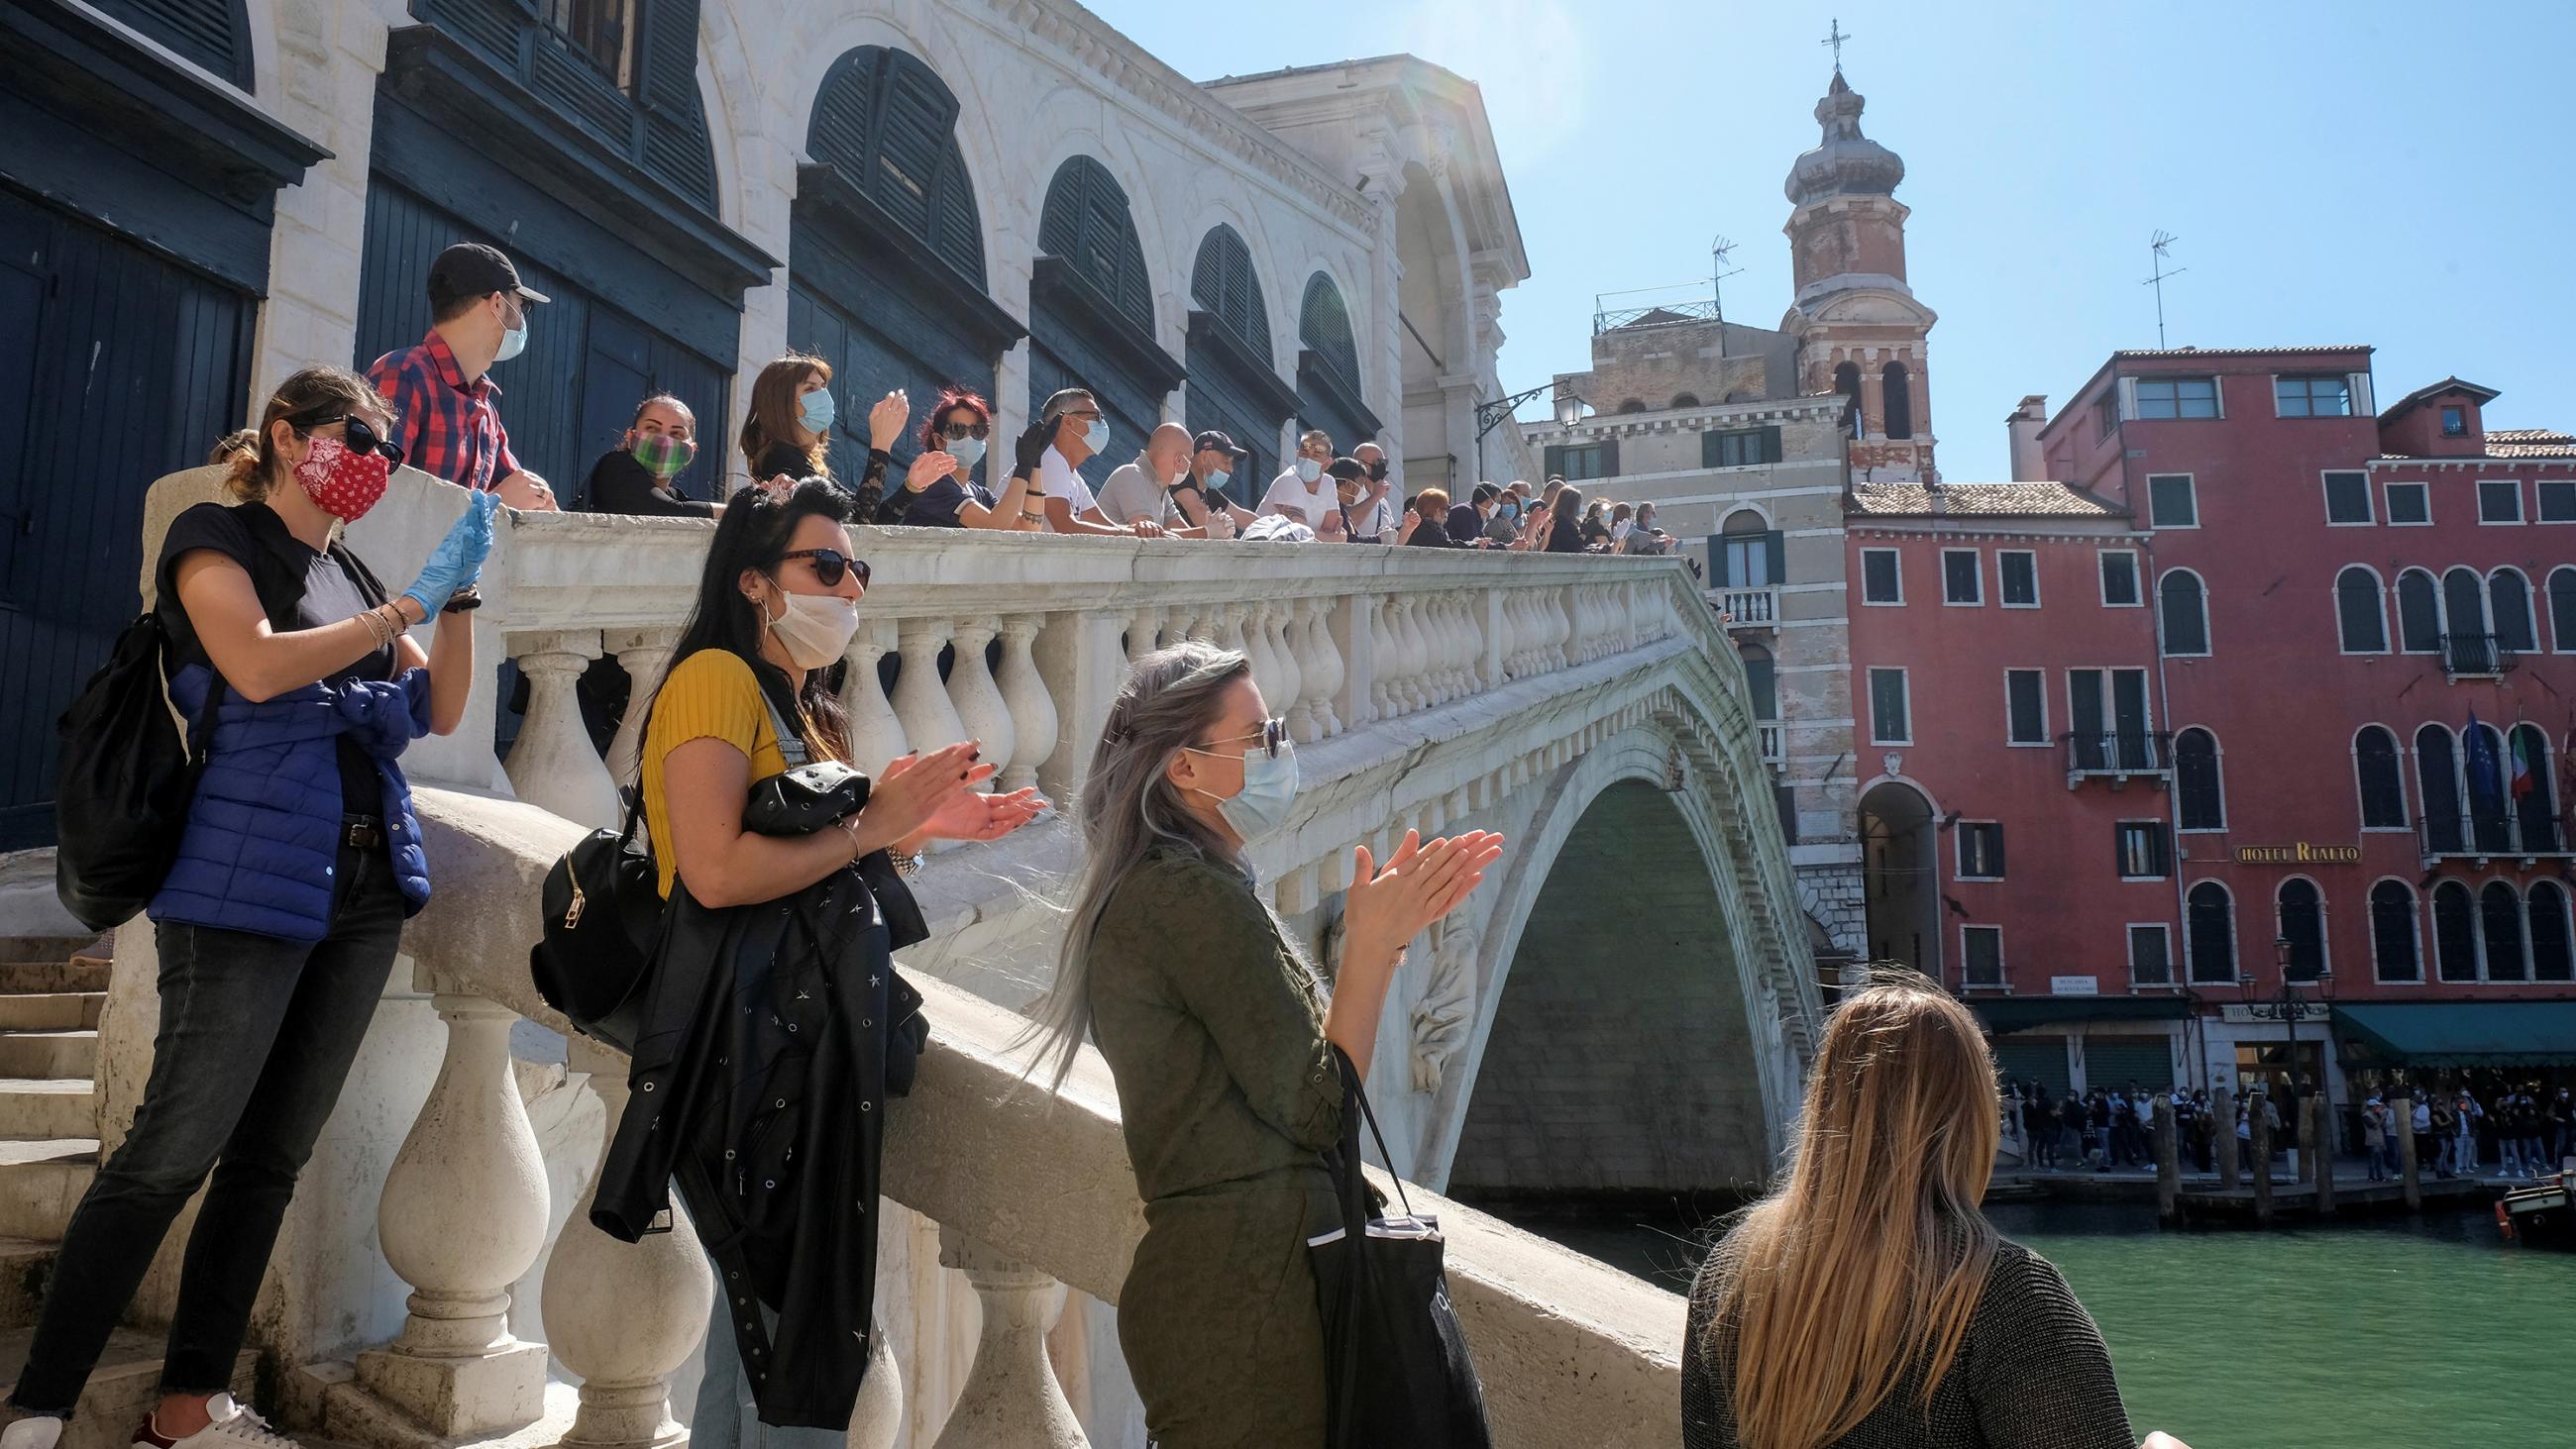 The photo shows a line of people social distancing standing on a picturesque bridge on a beautiful sunny day. 